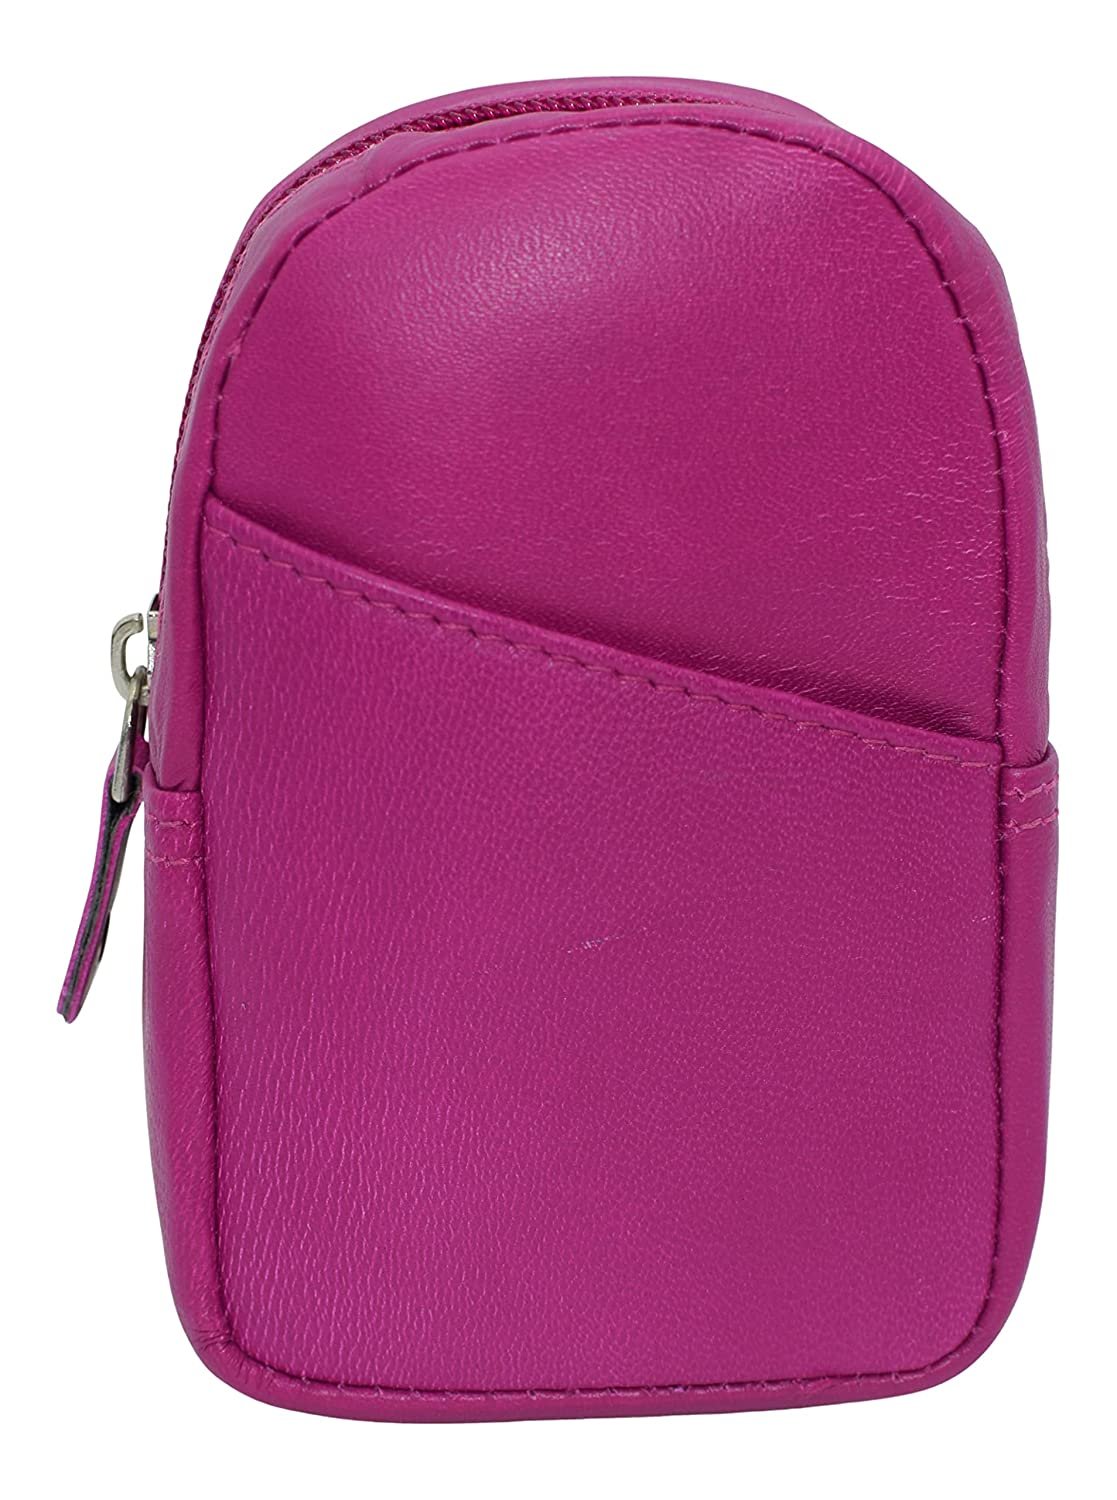 Genuine Leather Zipper Around Cigarette Case Holder and Lighter Pouch for Men & Women 100's (Hot Pink)